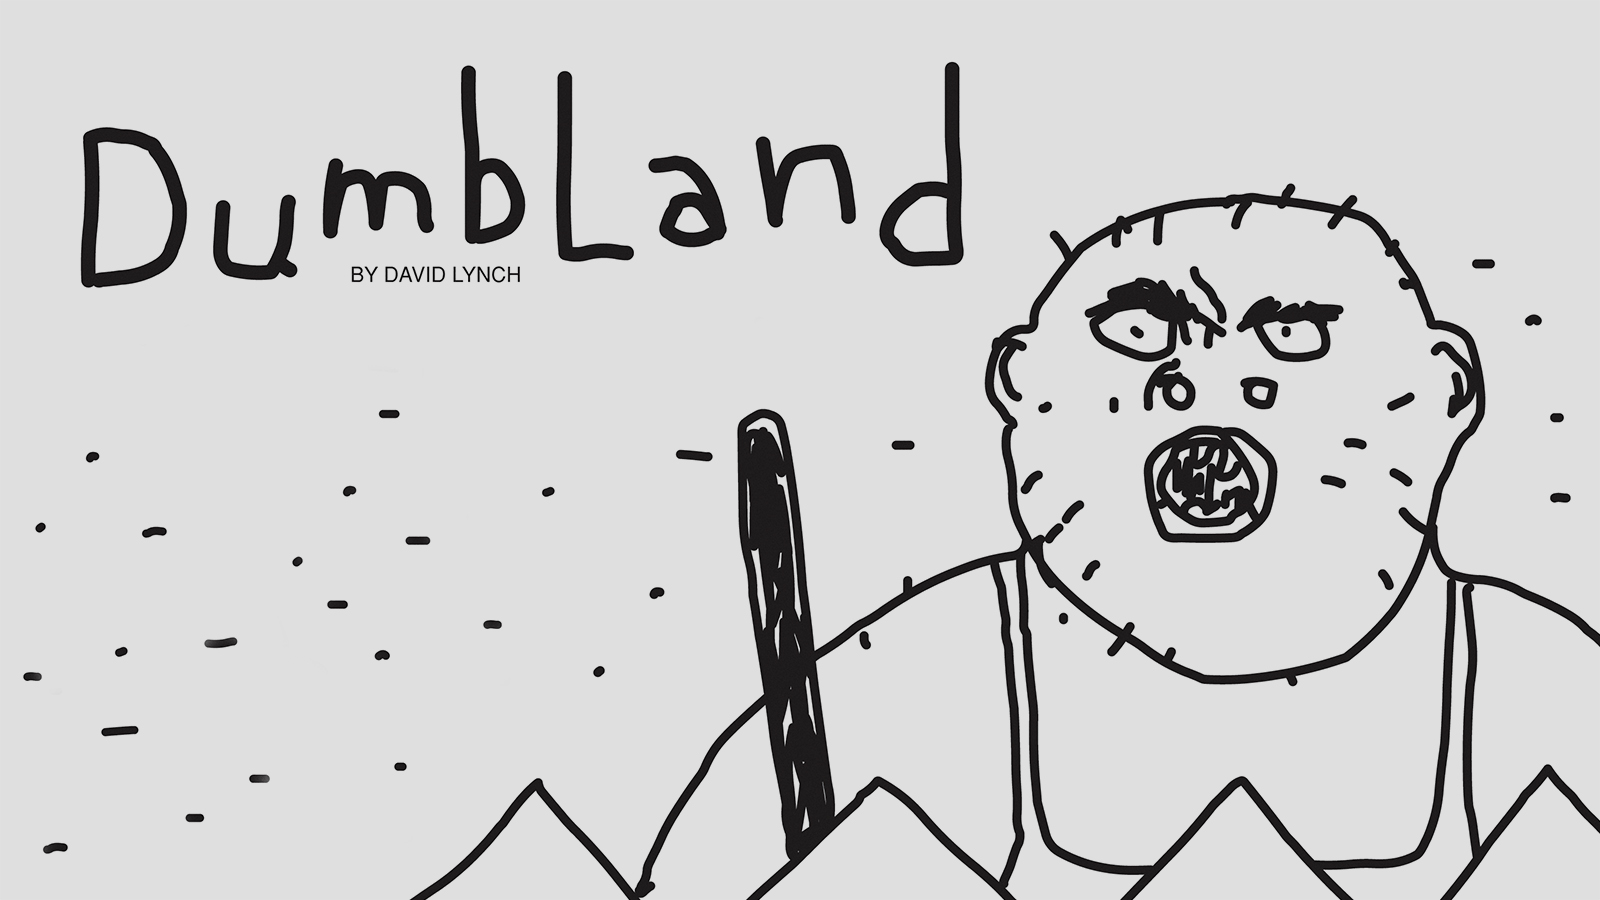 DumbLand - The Criterion Channel